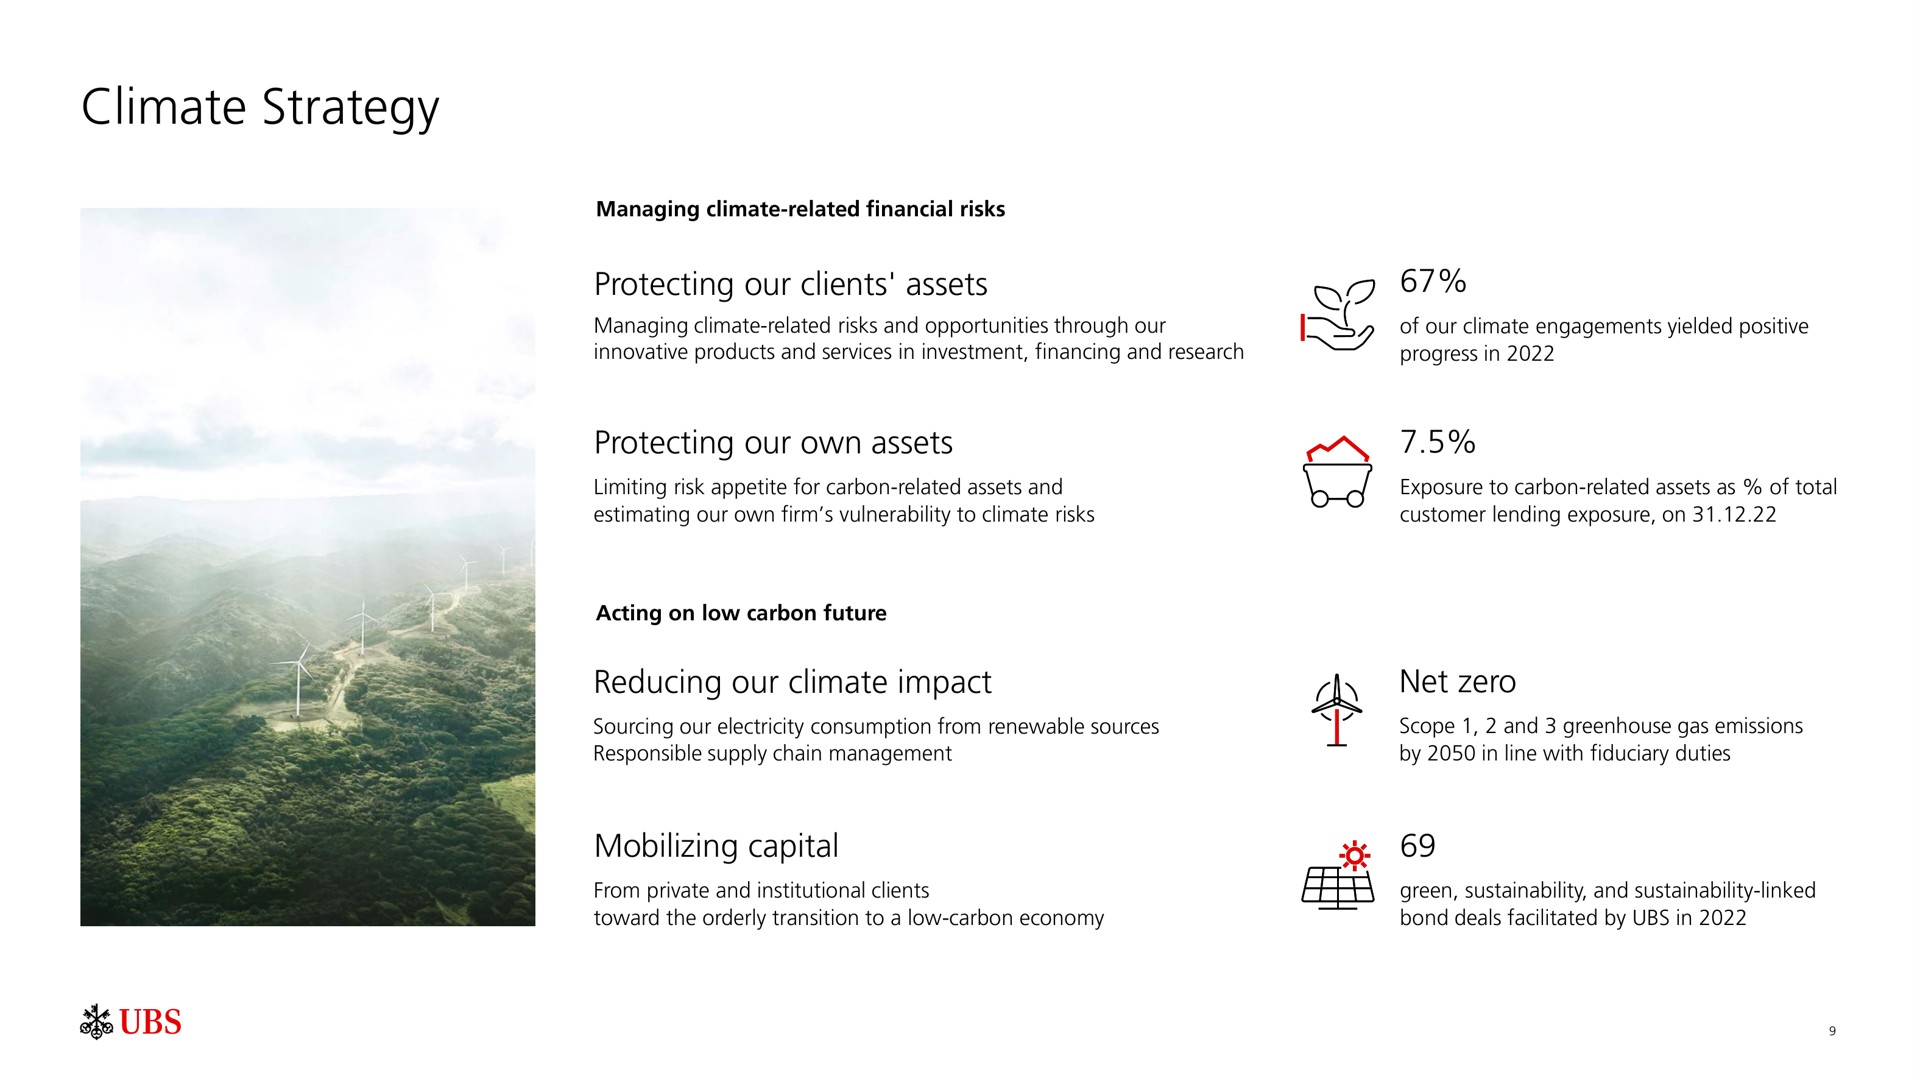 climate strategy protecting our clients assets protecting our own assets reducing our climate impact net zero mobilizing capital | UBS